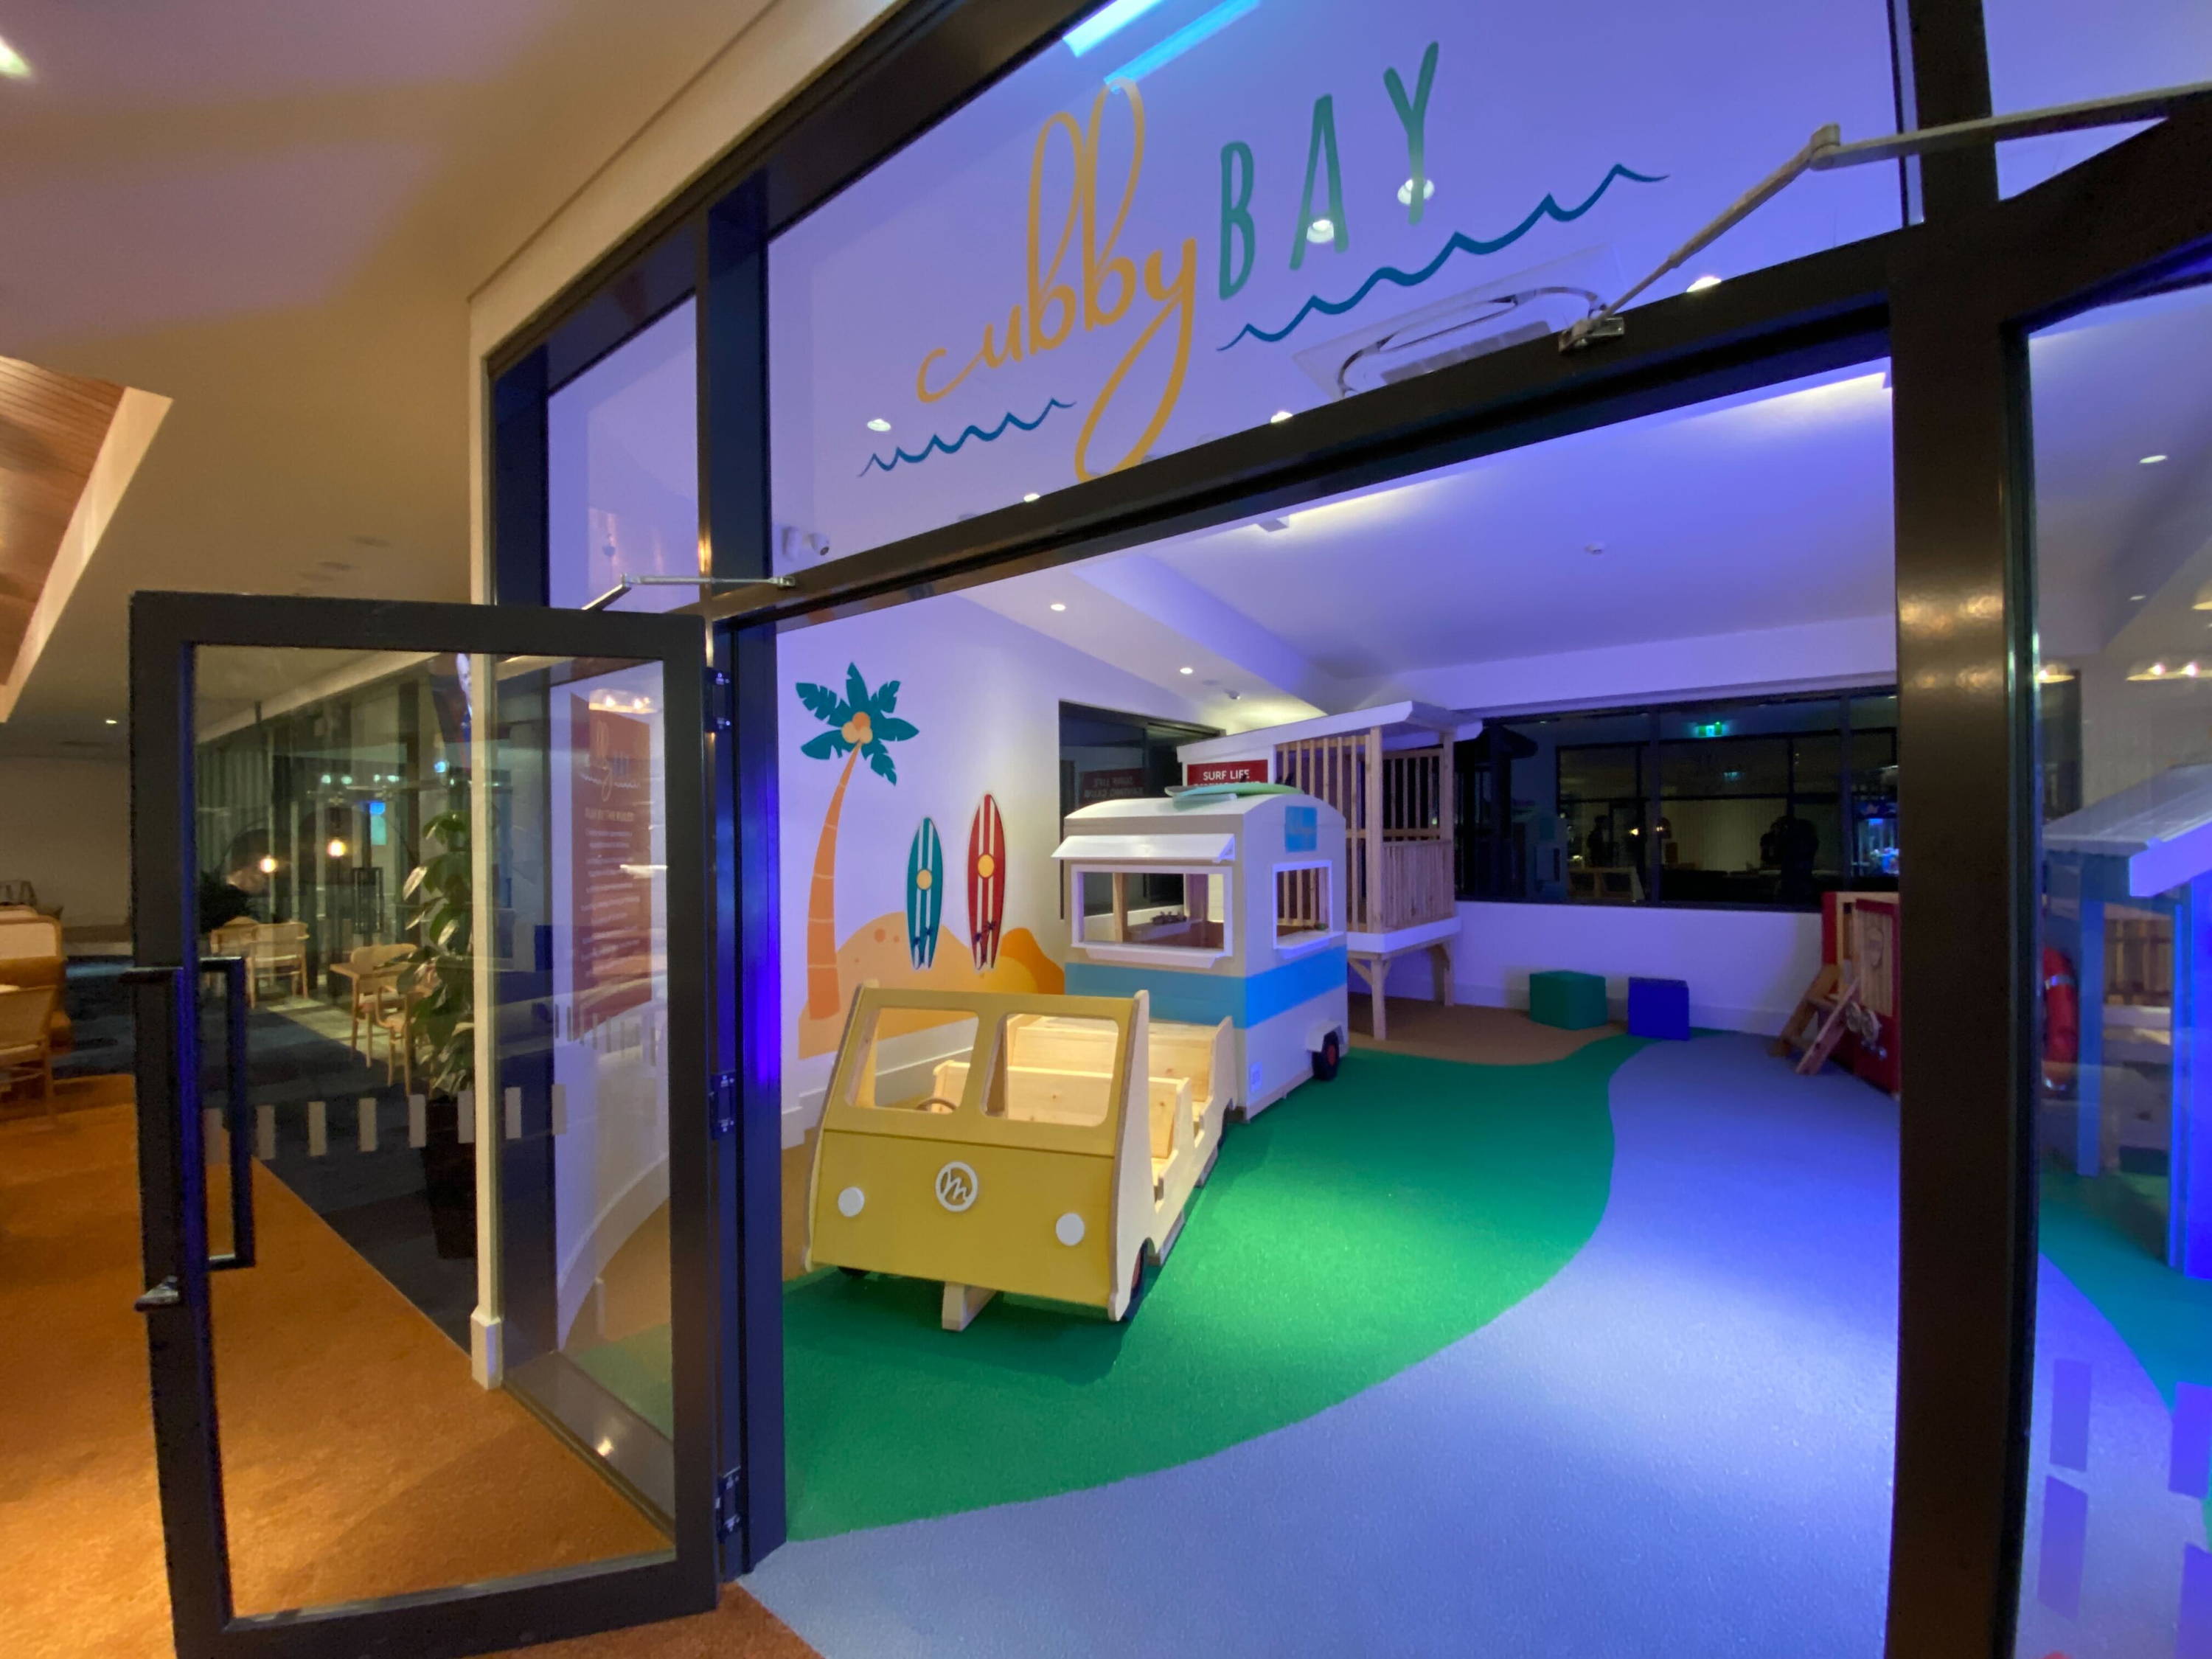 Castle & Cubby installation of inside play area at Club Malua on the south coast of NSW